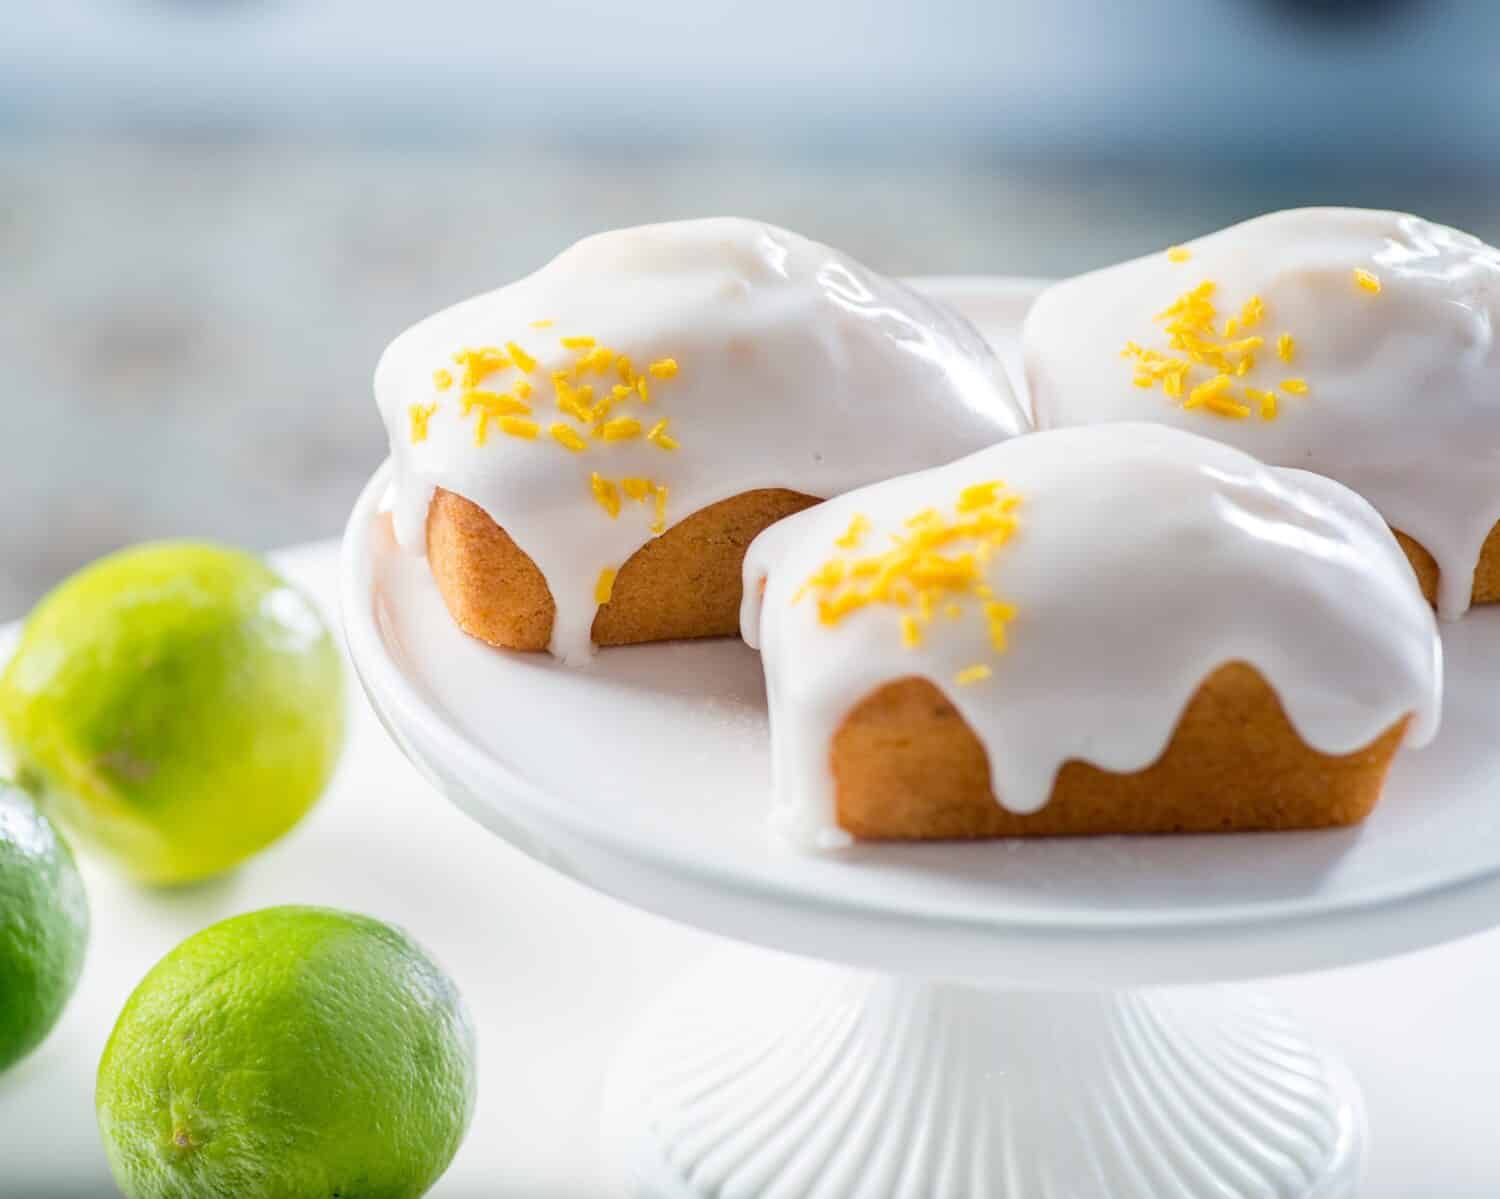 Rectangular muffins covered with white cream icing and sprinkled with lime zest